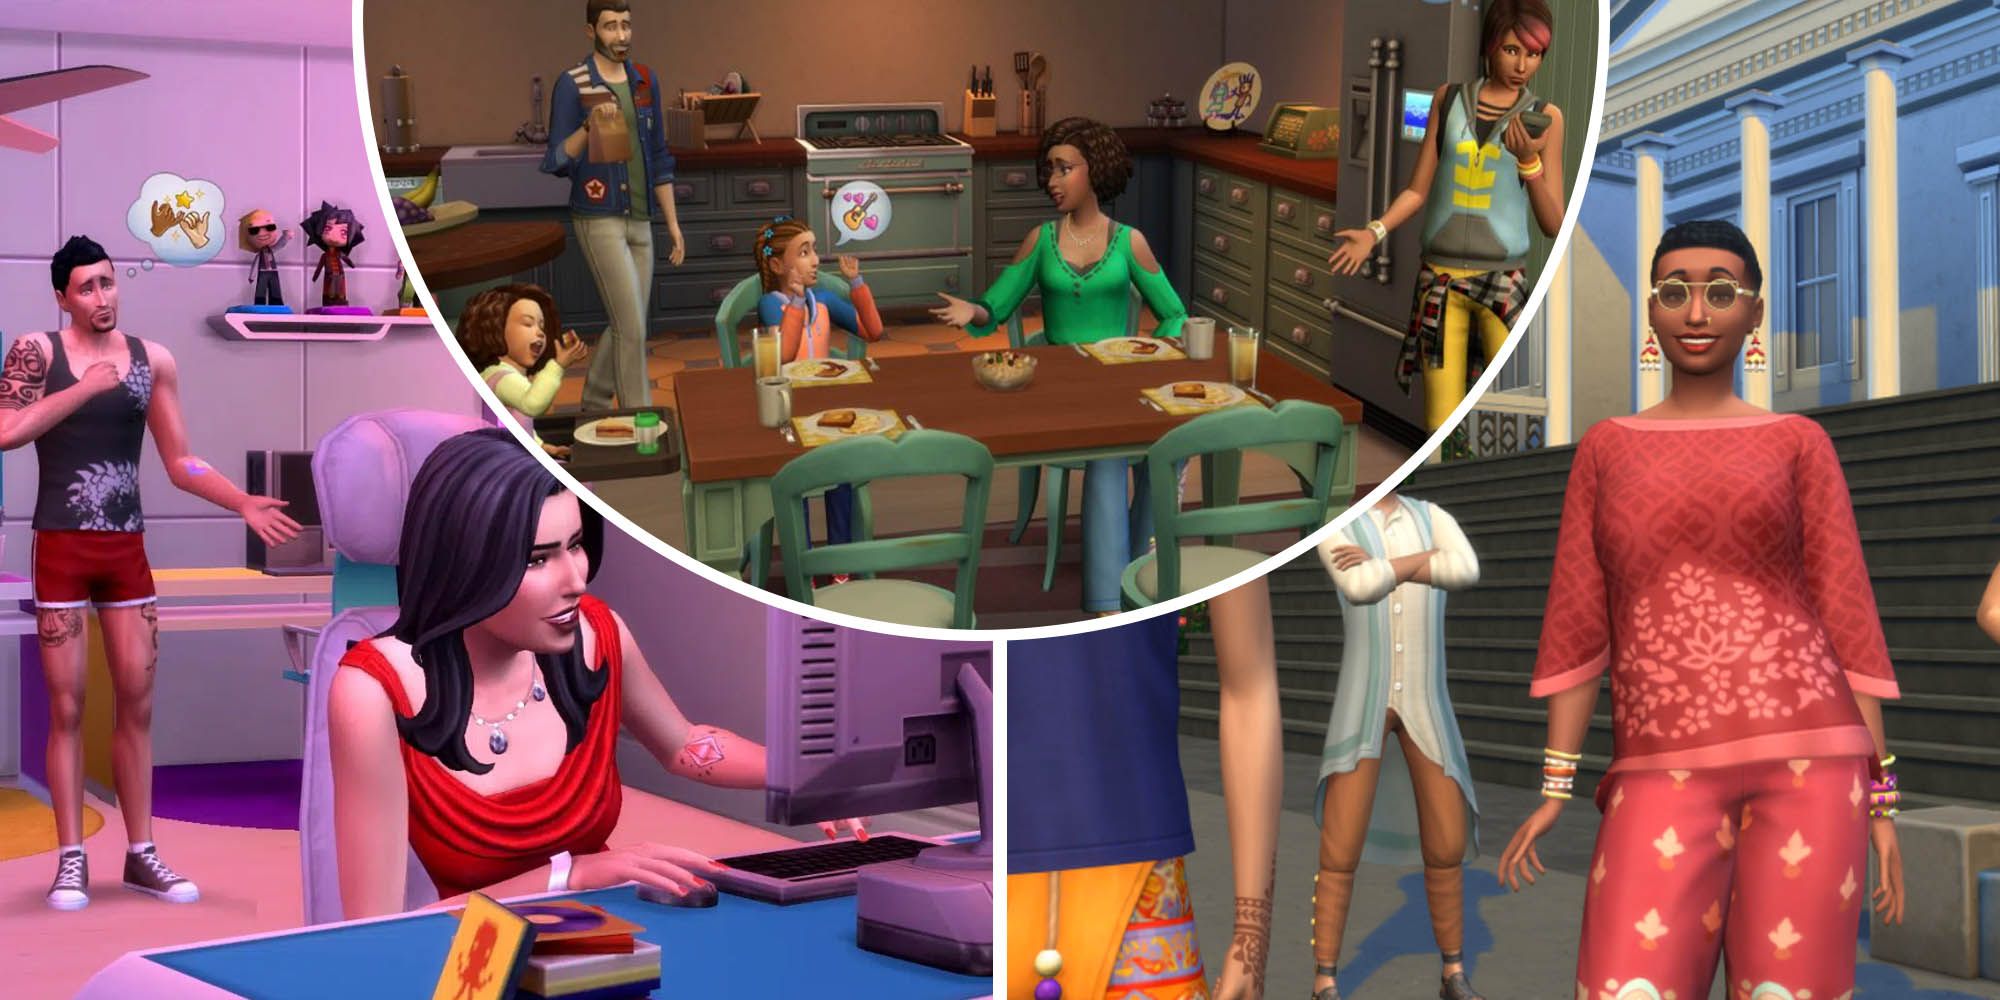 The Sims 4 sims using computer and others are having dinner